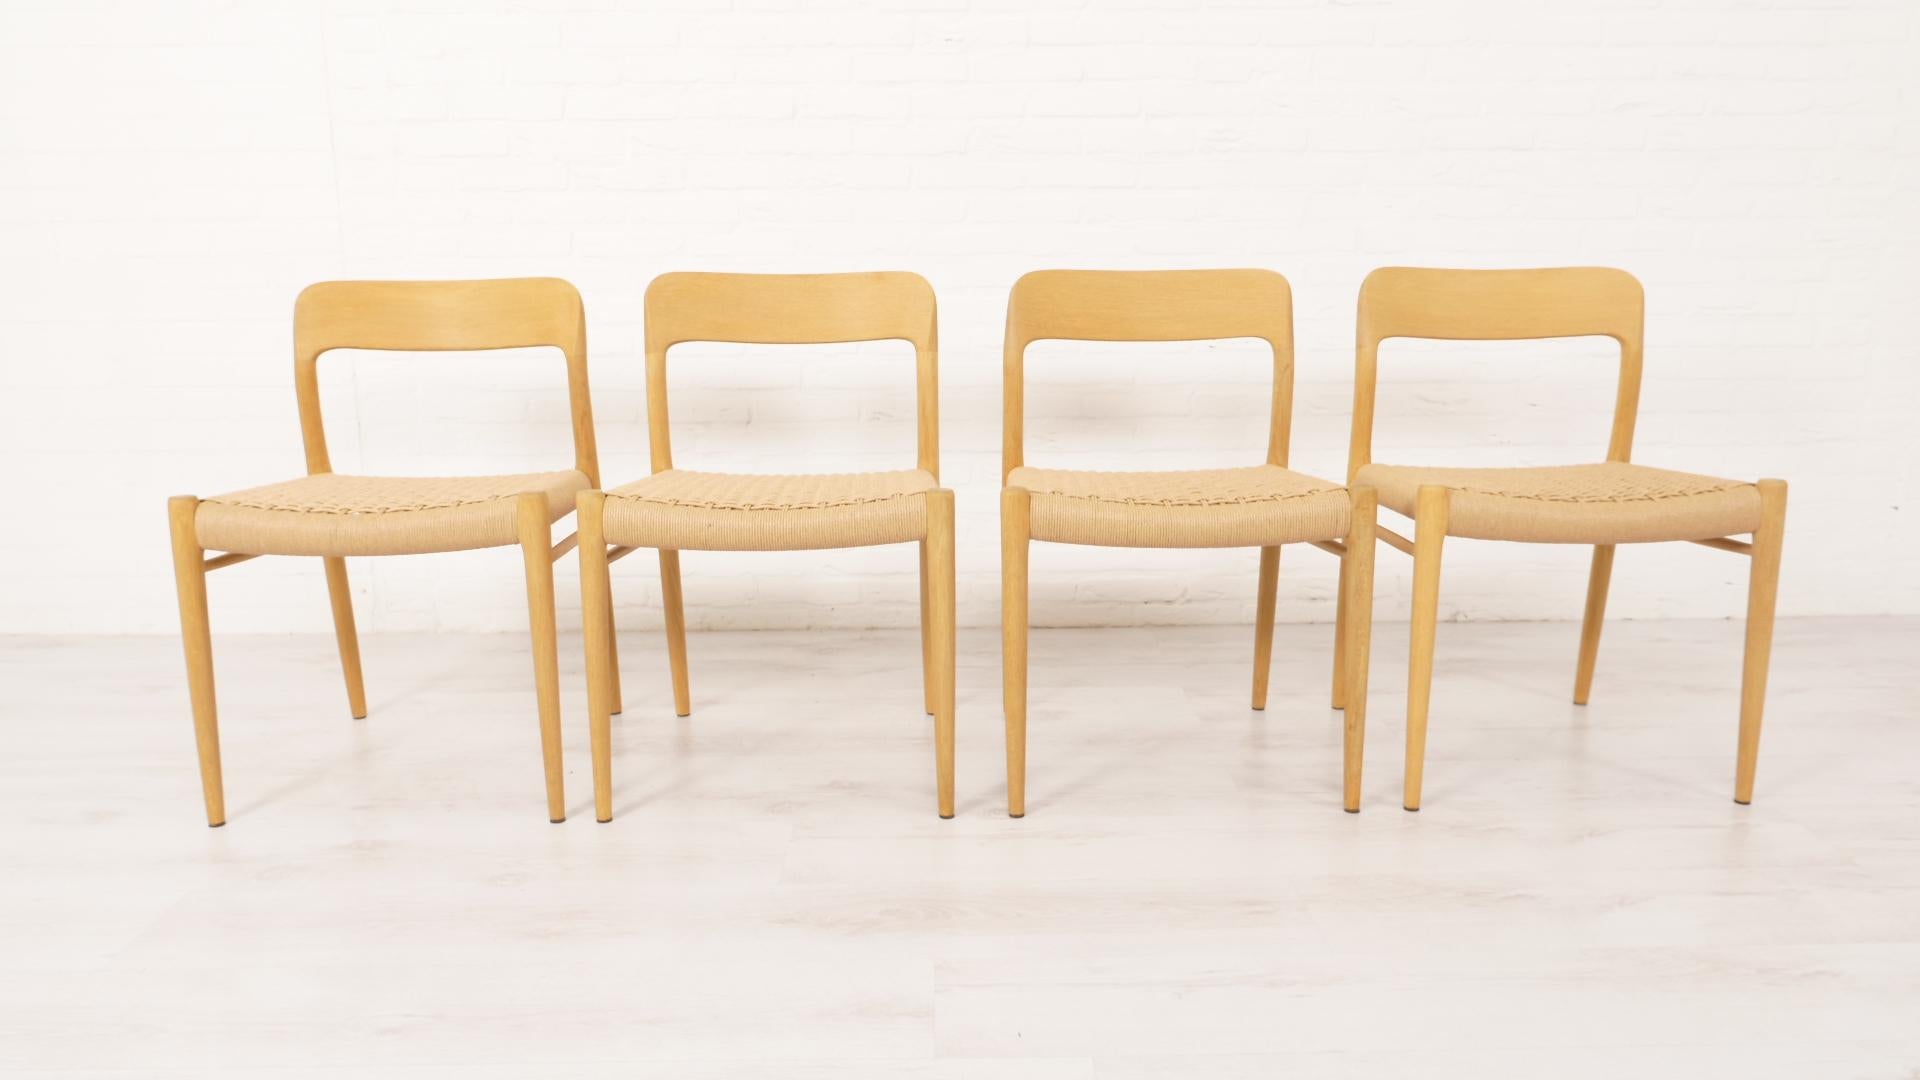 Set of 4 beautiful Danish vintage dining chairs. These chairs were designed by Niels Otto Møller. The chairs are finished in oak and fitted with new papercord. The frames are all finished with Danish soap.

Design period: 1950 - 1960
Style: